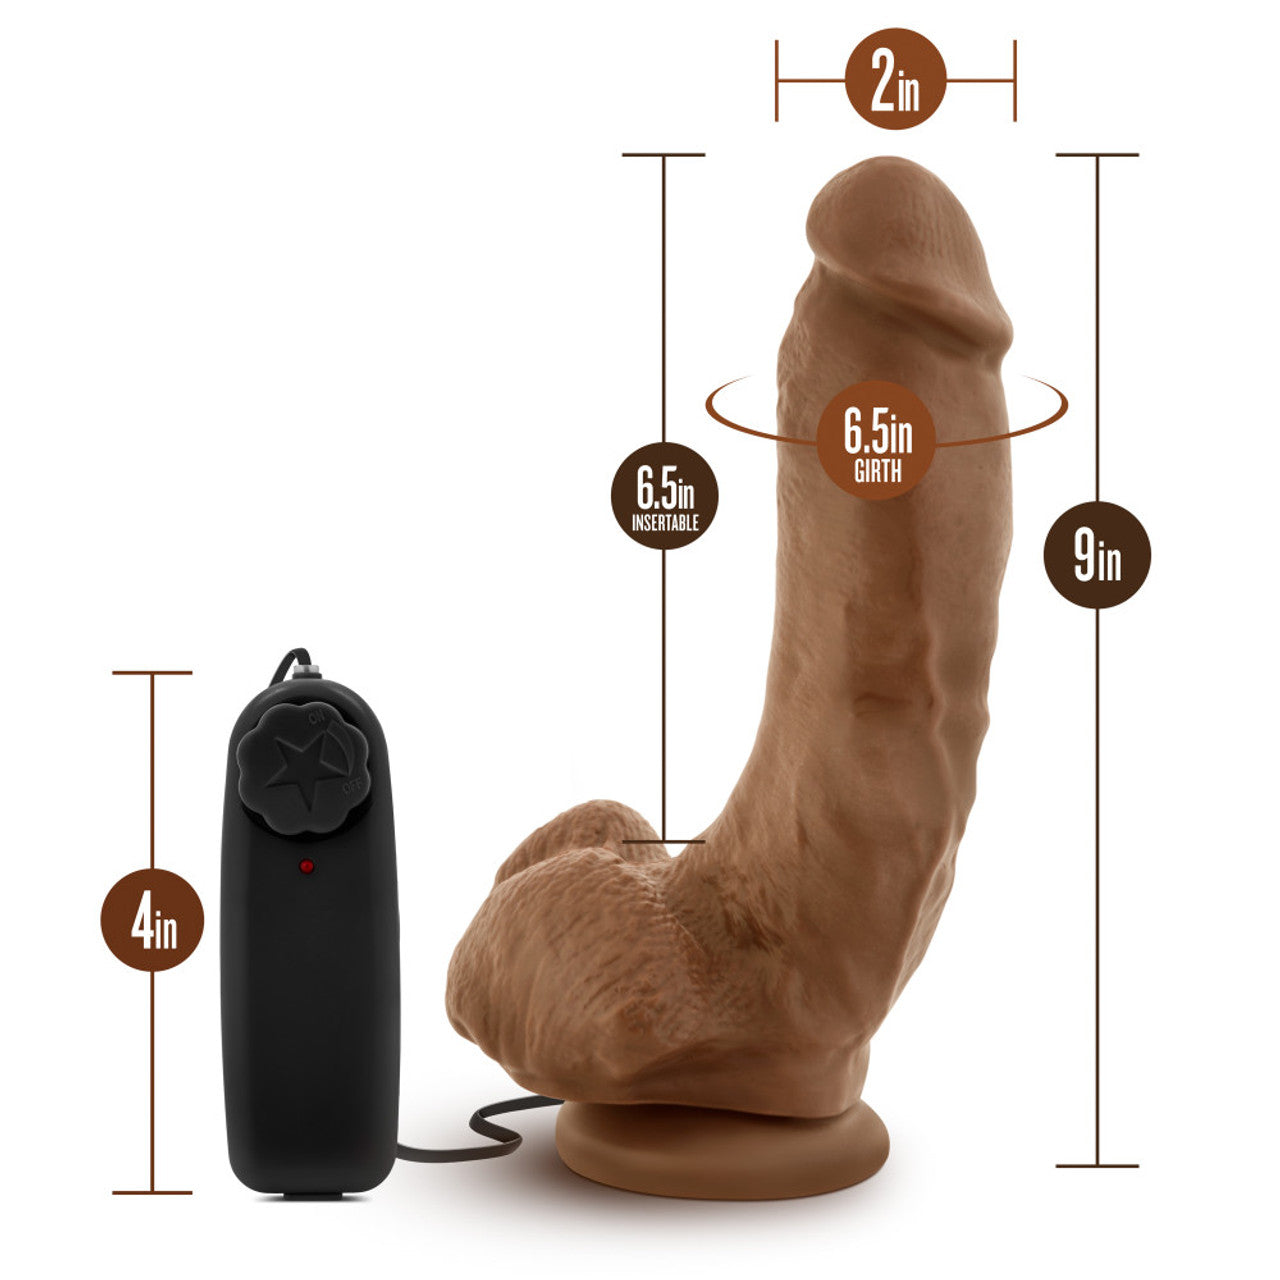 Loverboy The Boxer 9" Vibrating Realistic Cock - Mocha - Thorn & Feather Sex Toy Canada